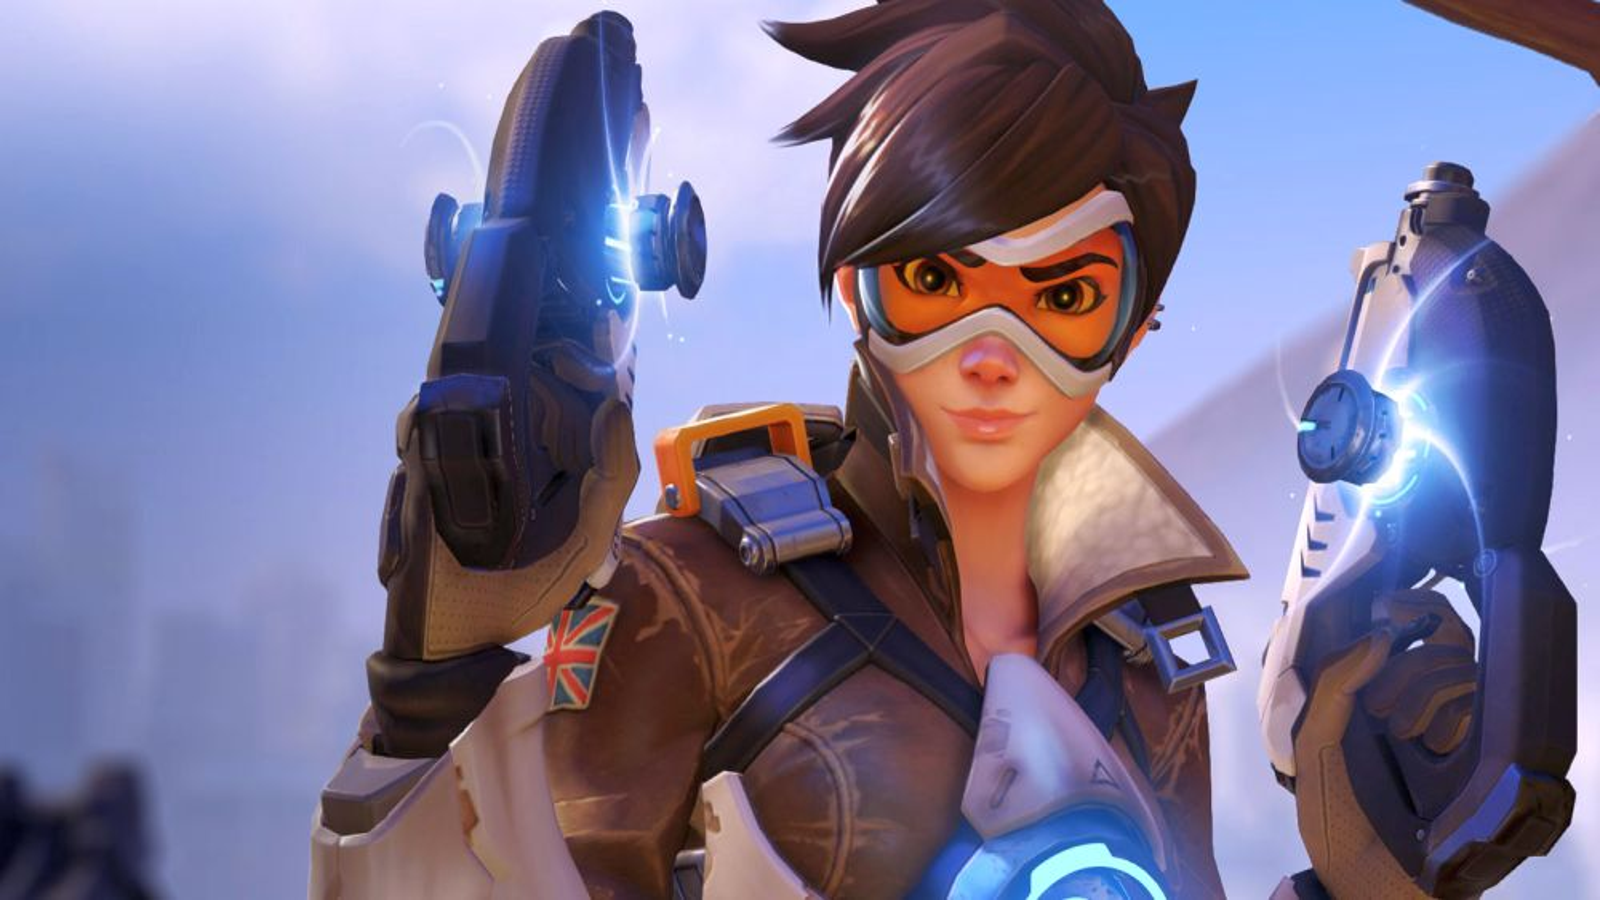 Tracer (Overwatch / Game) – Time to collect